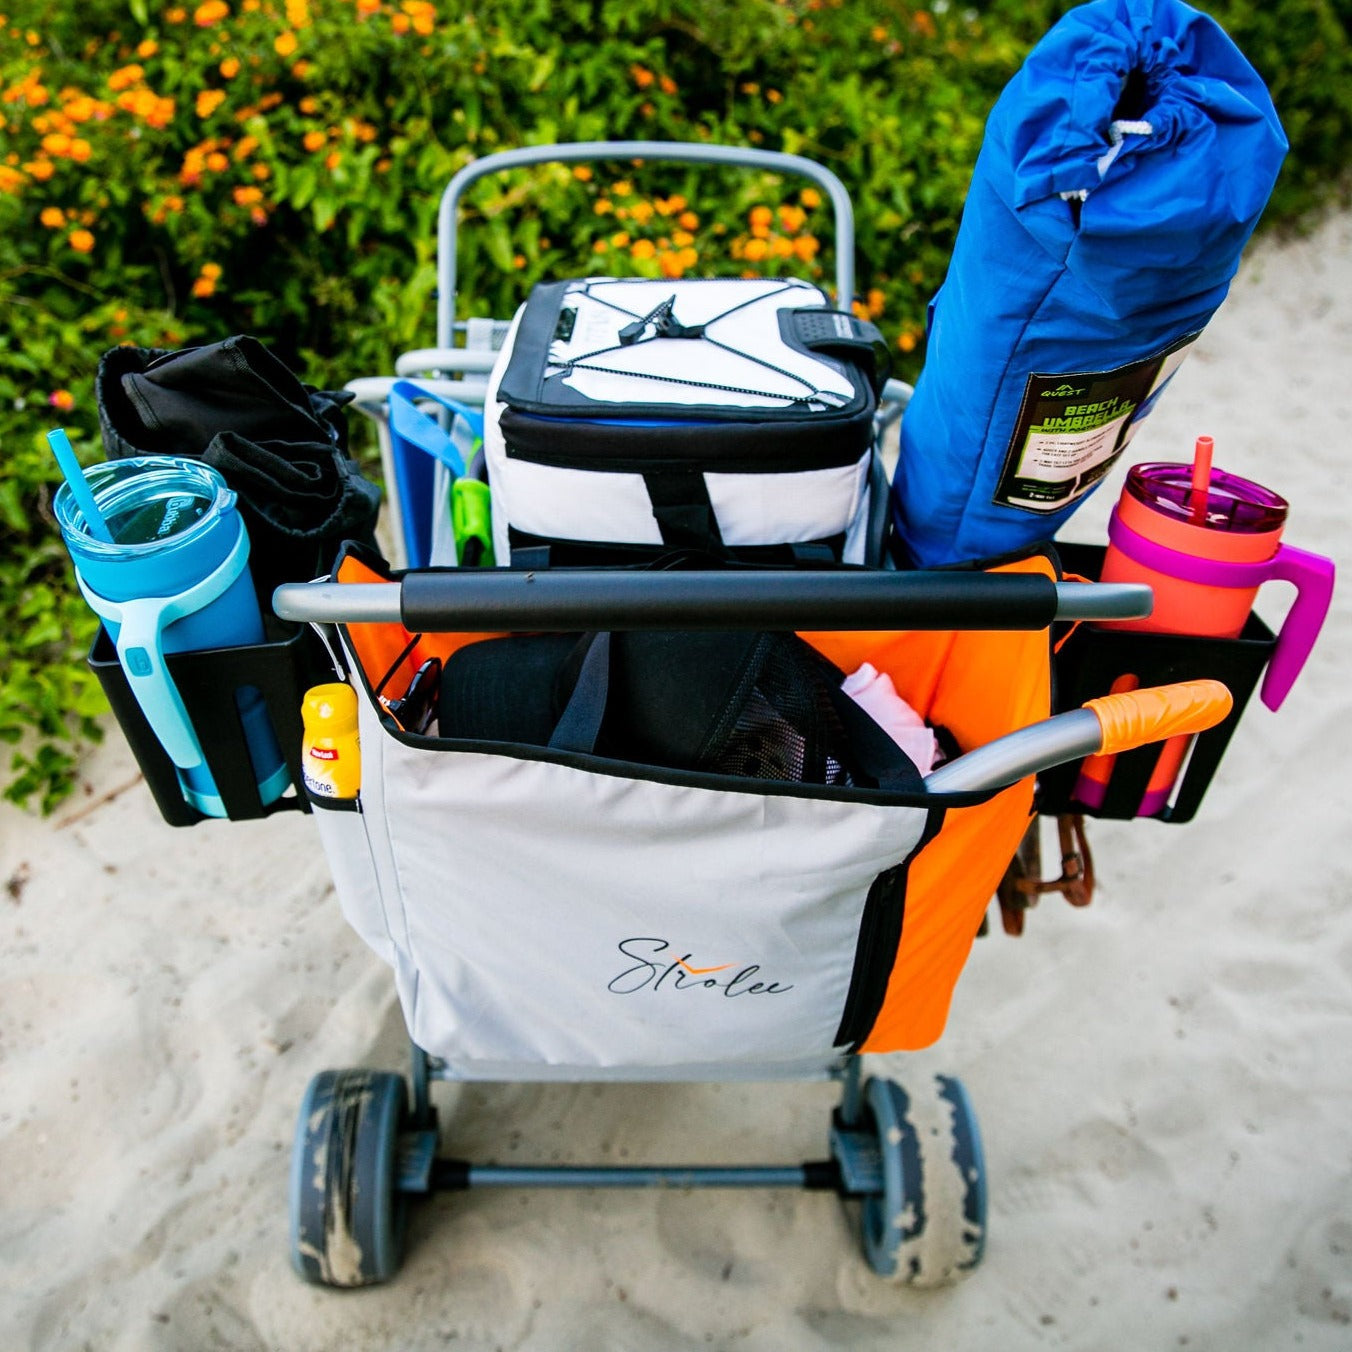 Beach Cart by Strolee - Best Foldable Large Balloon Tires for Soft